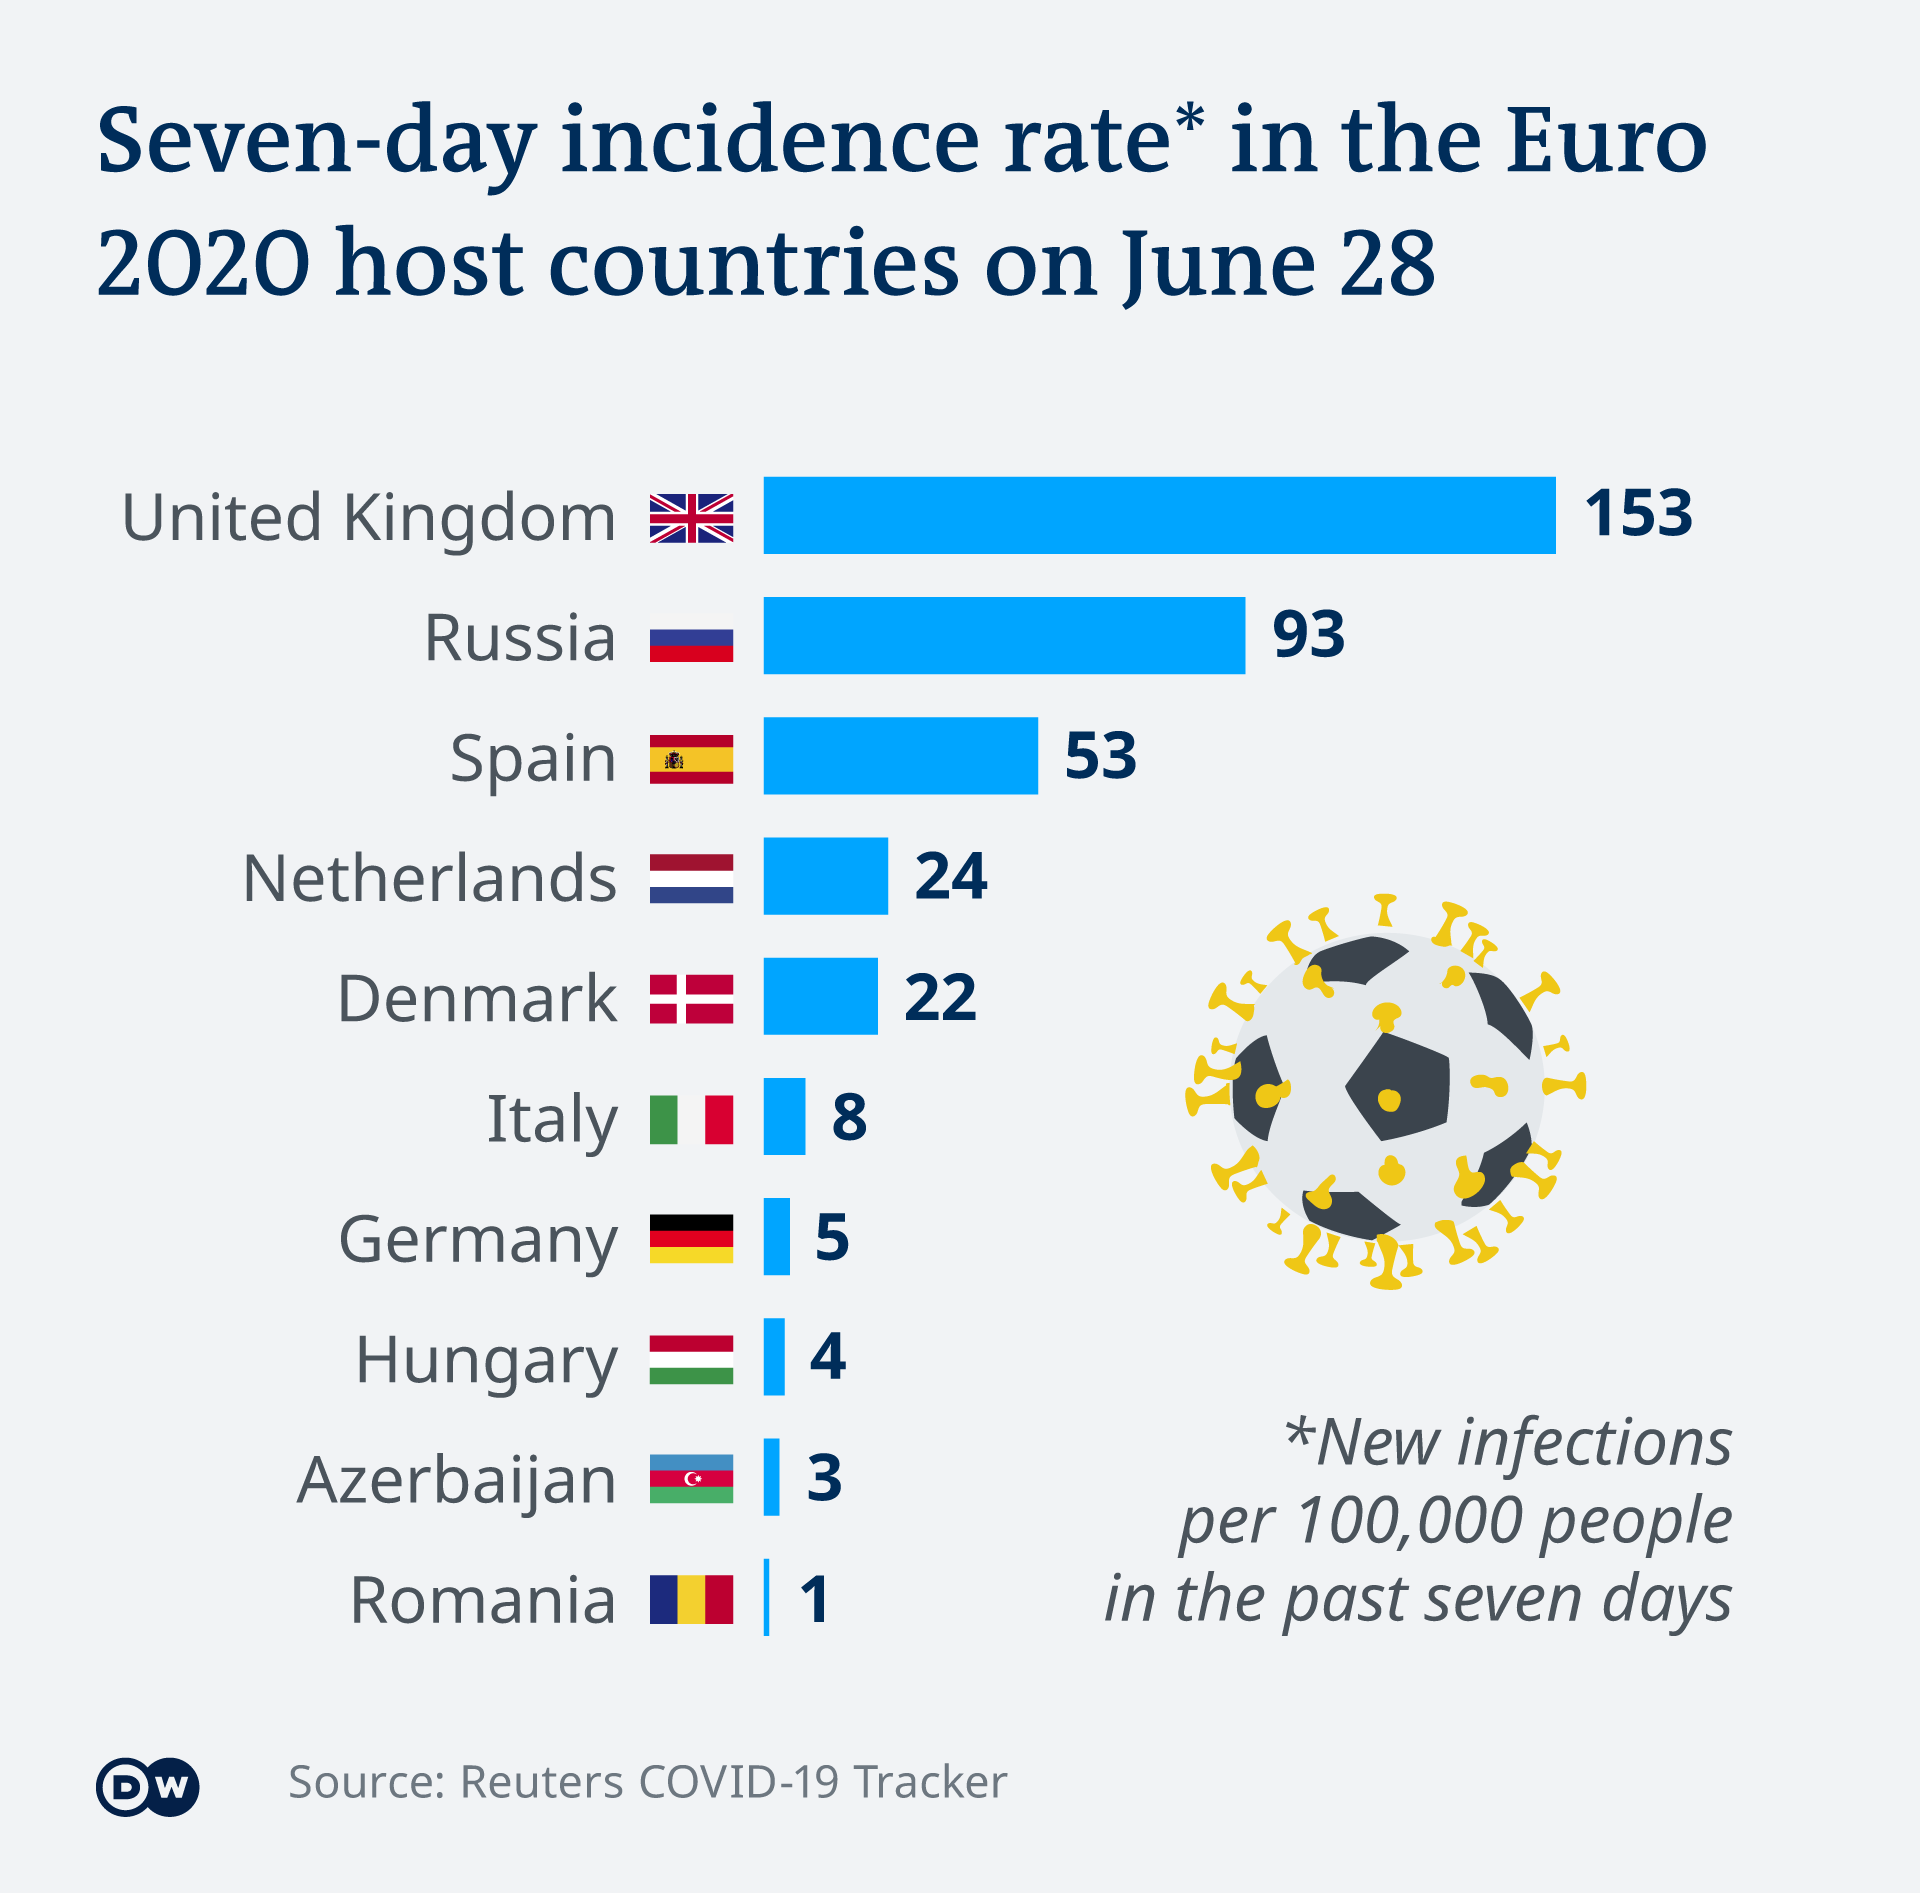 Infographic incidence rate in the Euro 2020 host countries